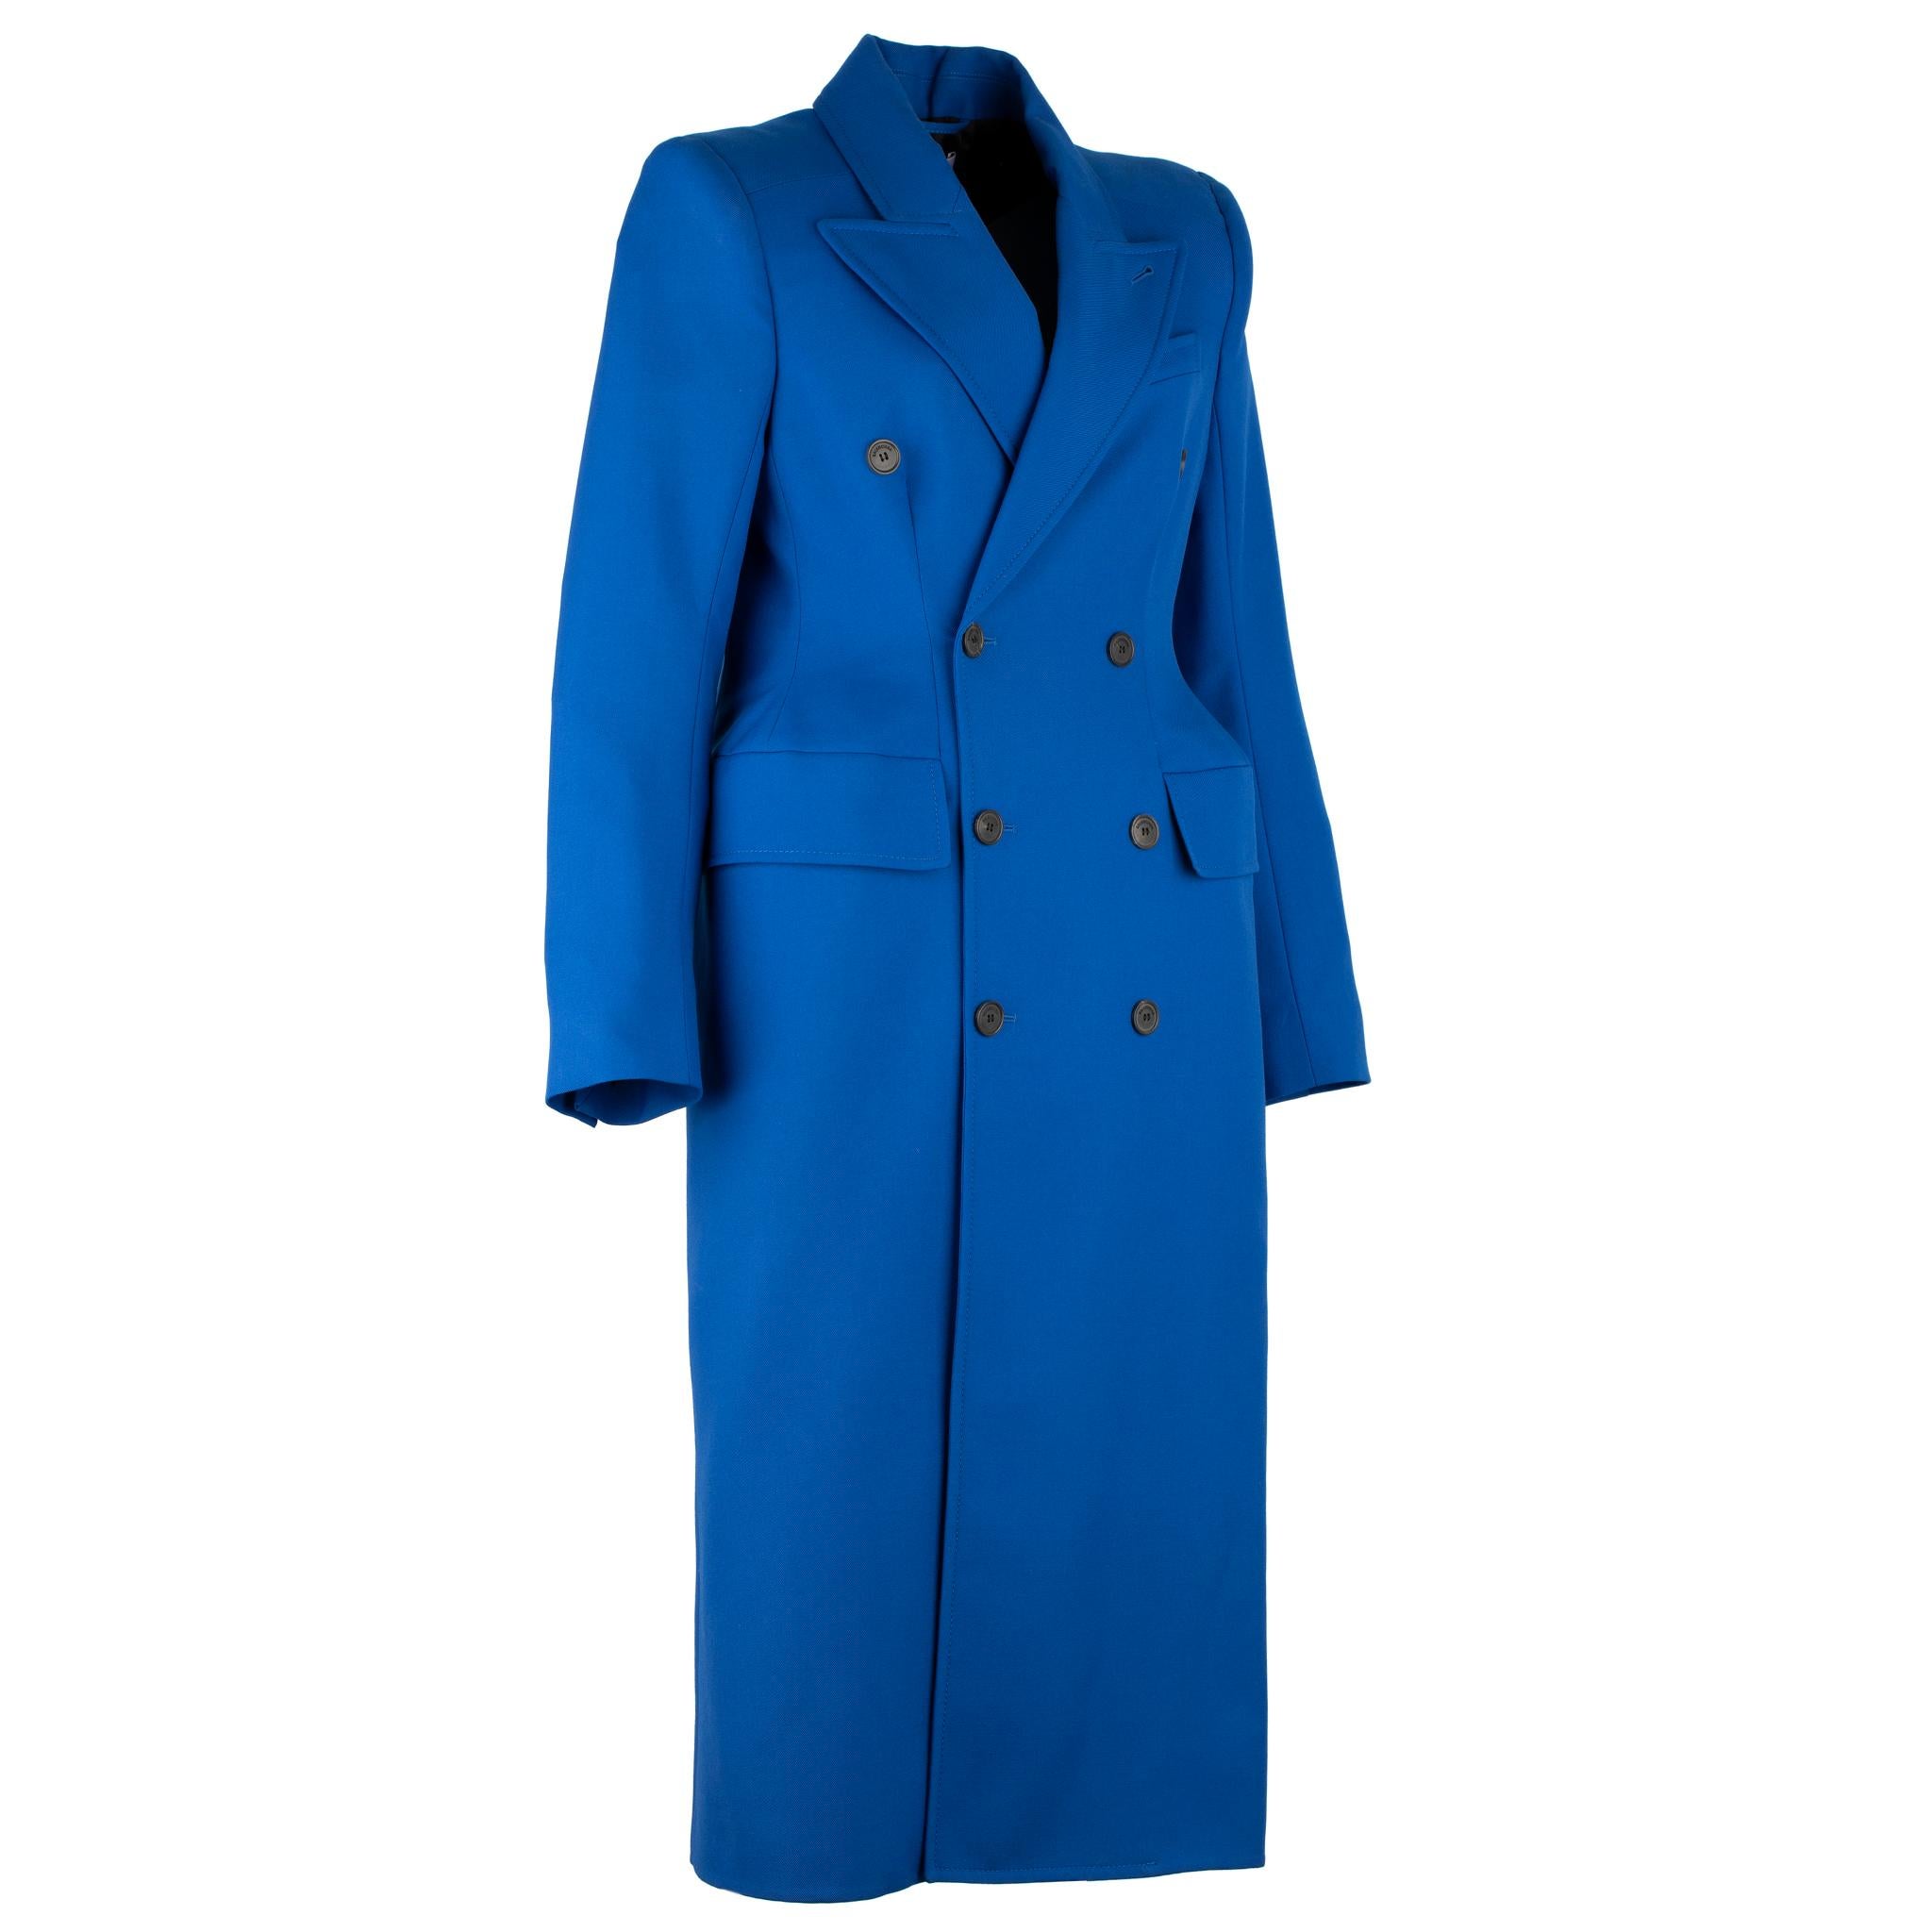 Balenciaga Hourglass Double Breasted Wool Blend Coat Blue

Brand:

Balenciaga

Product:

Hourglass Double Breasted Wool Blend Coat

Size:

38 Fr

Colour:

Royal Blue

Material:

50% Wool & 50% Polyester

Condition:

Pristine; Never Worn

Details:

-